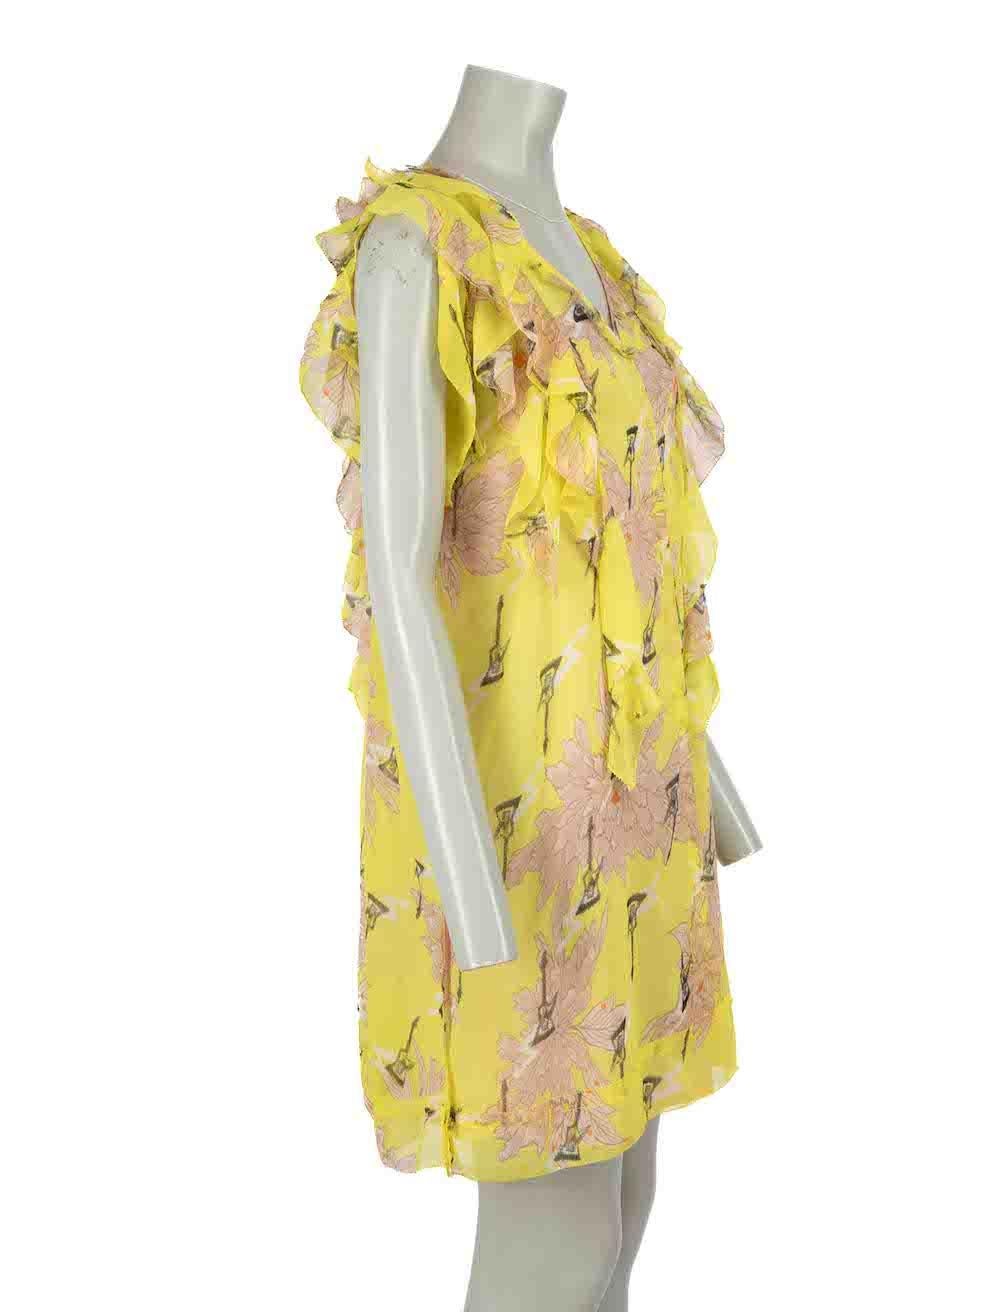 CONDITION is Very good. Hardly any visible wear to dress is evident on this used Zadig & Voltaire designer resale item.
 
 Details
 Yellow
 Polyester
 Mini dress
 Floral pattern
 Ruffles accent
 Sheer
 V neckline
 Back tie strap closure on back
 
 
